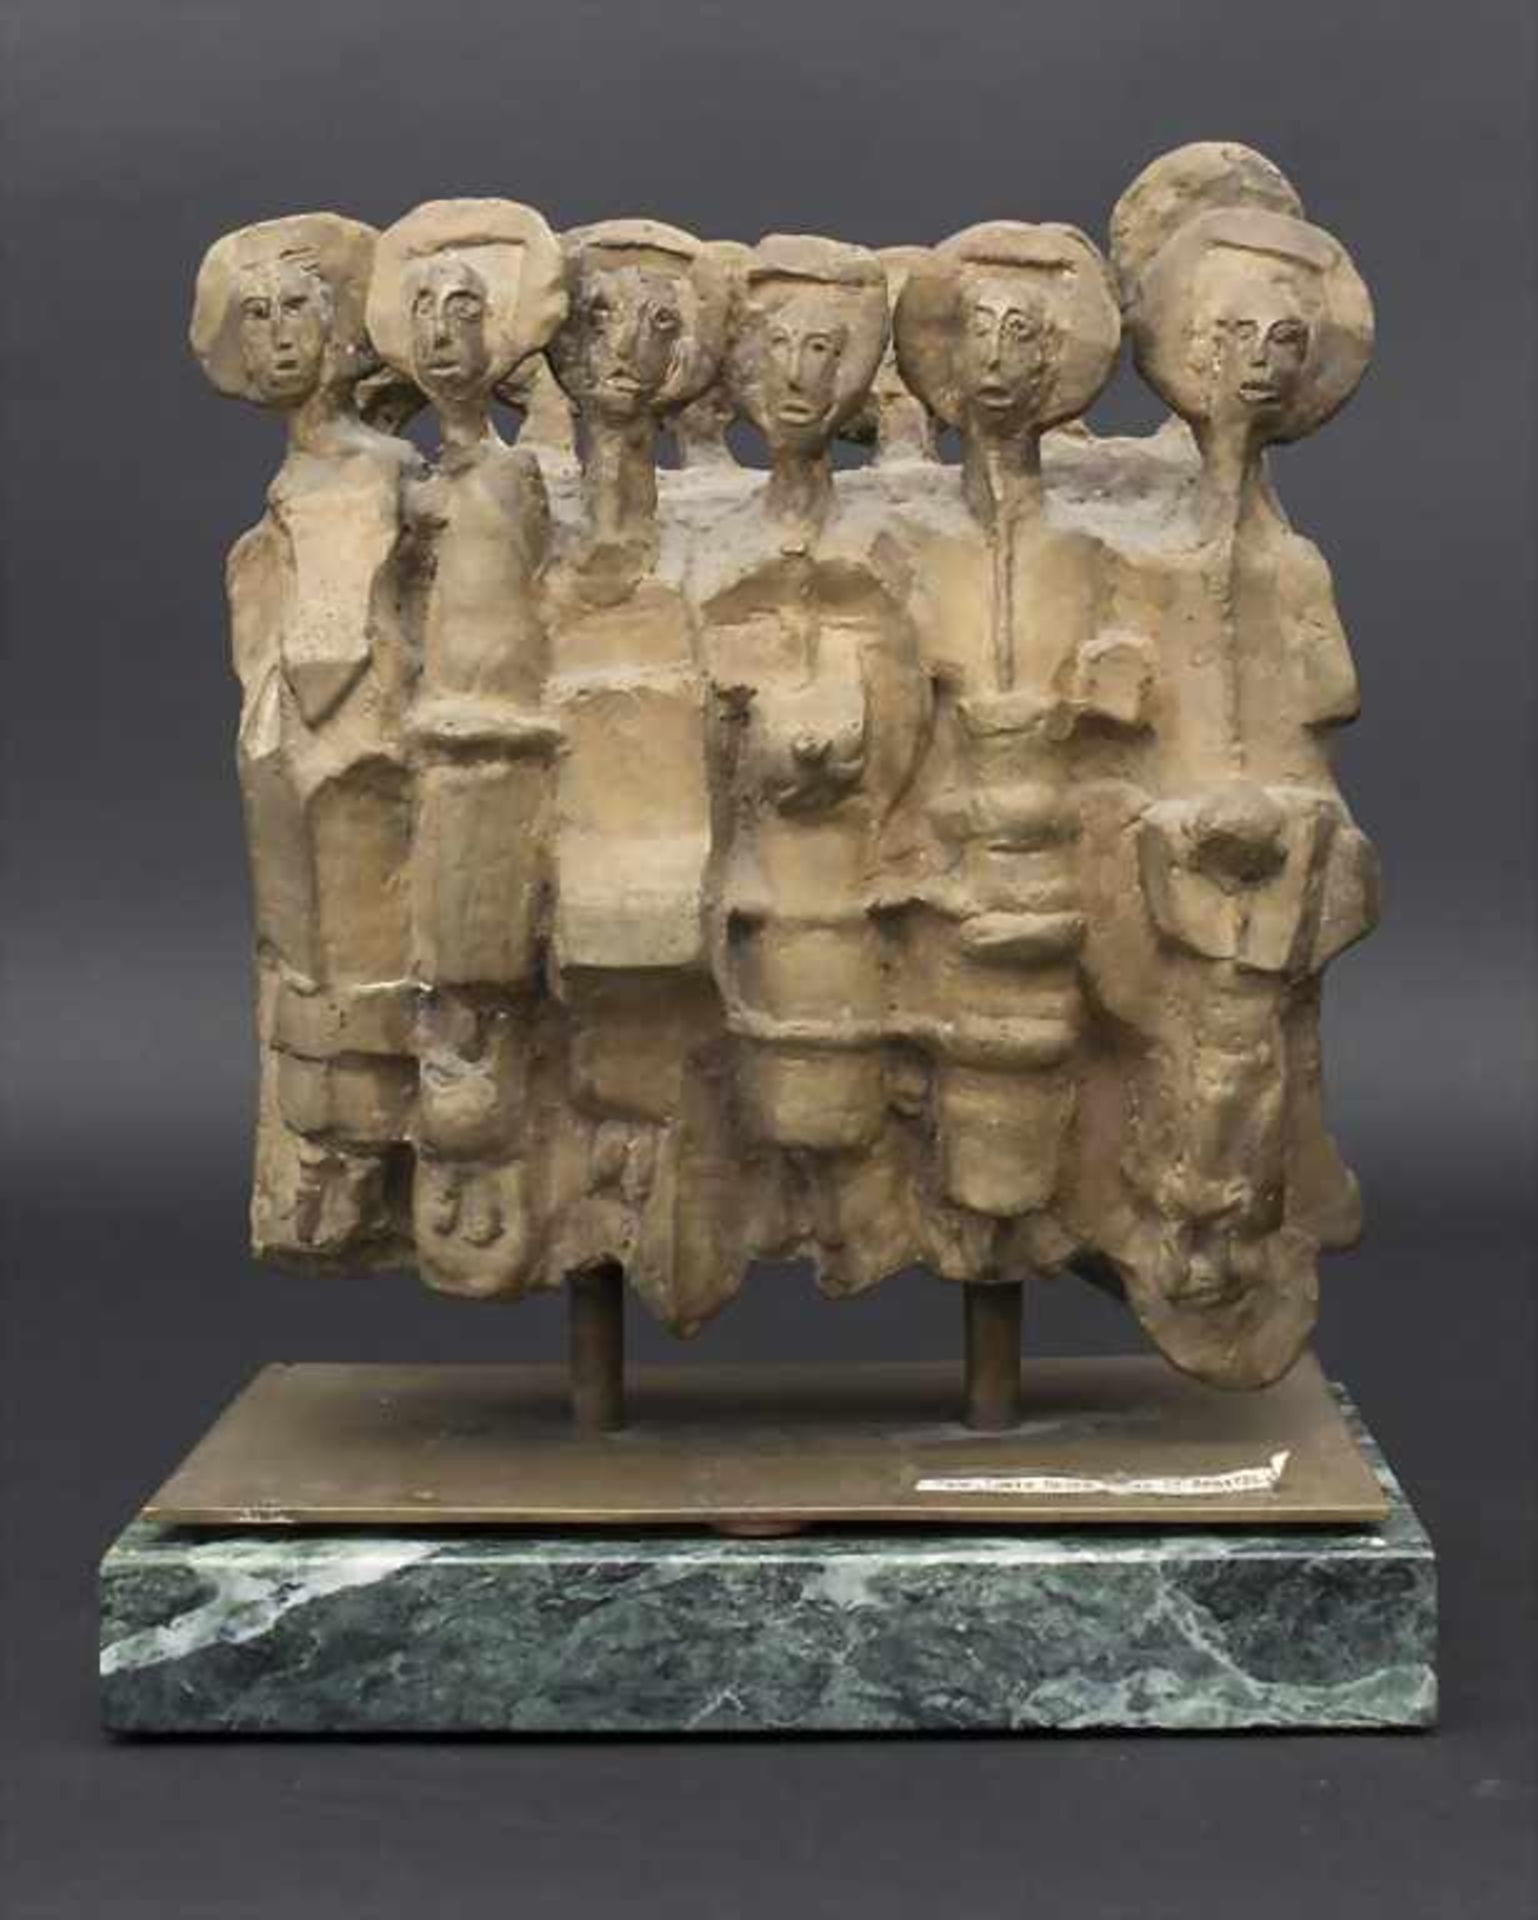 Edwin Neyer (1913-1984), Figurengruppe 'Die 12 Apostel' / A figural group 'The 12 apostels'